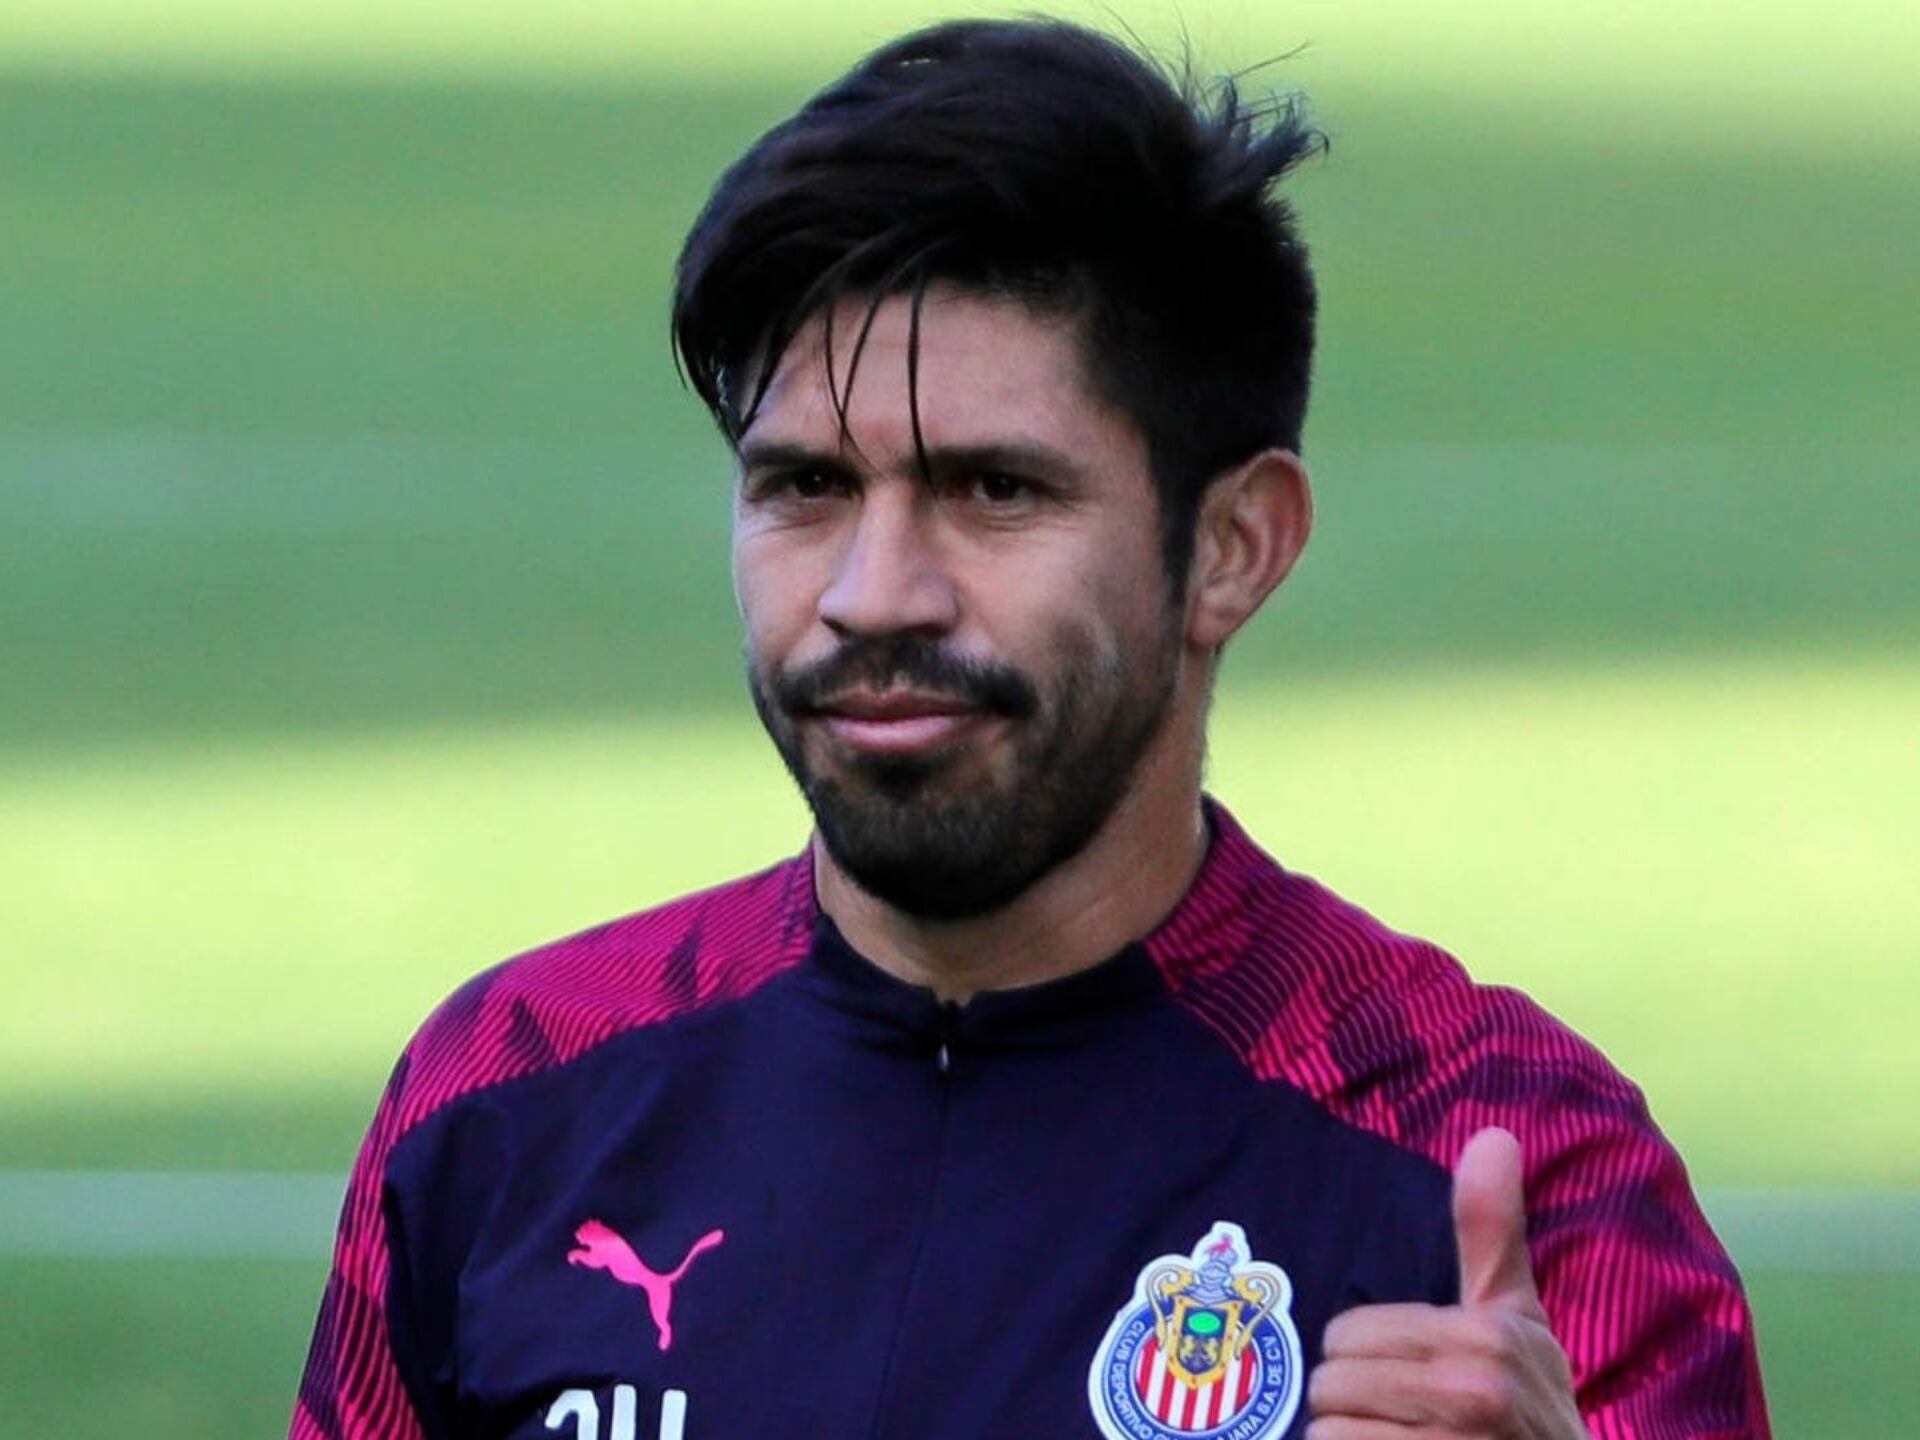 Chivas is looking to add a new striker for next season, but he’s worse than Oribe Peralta